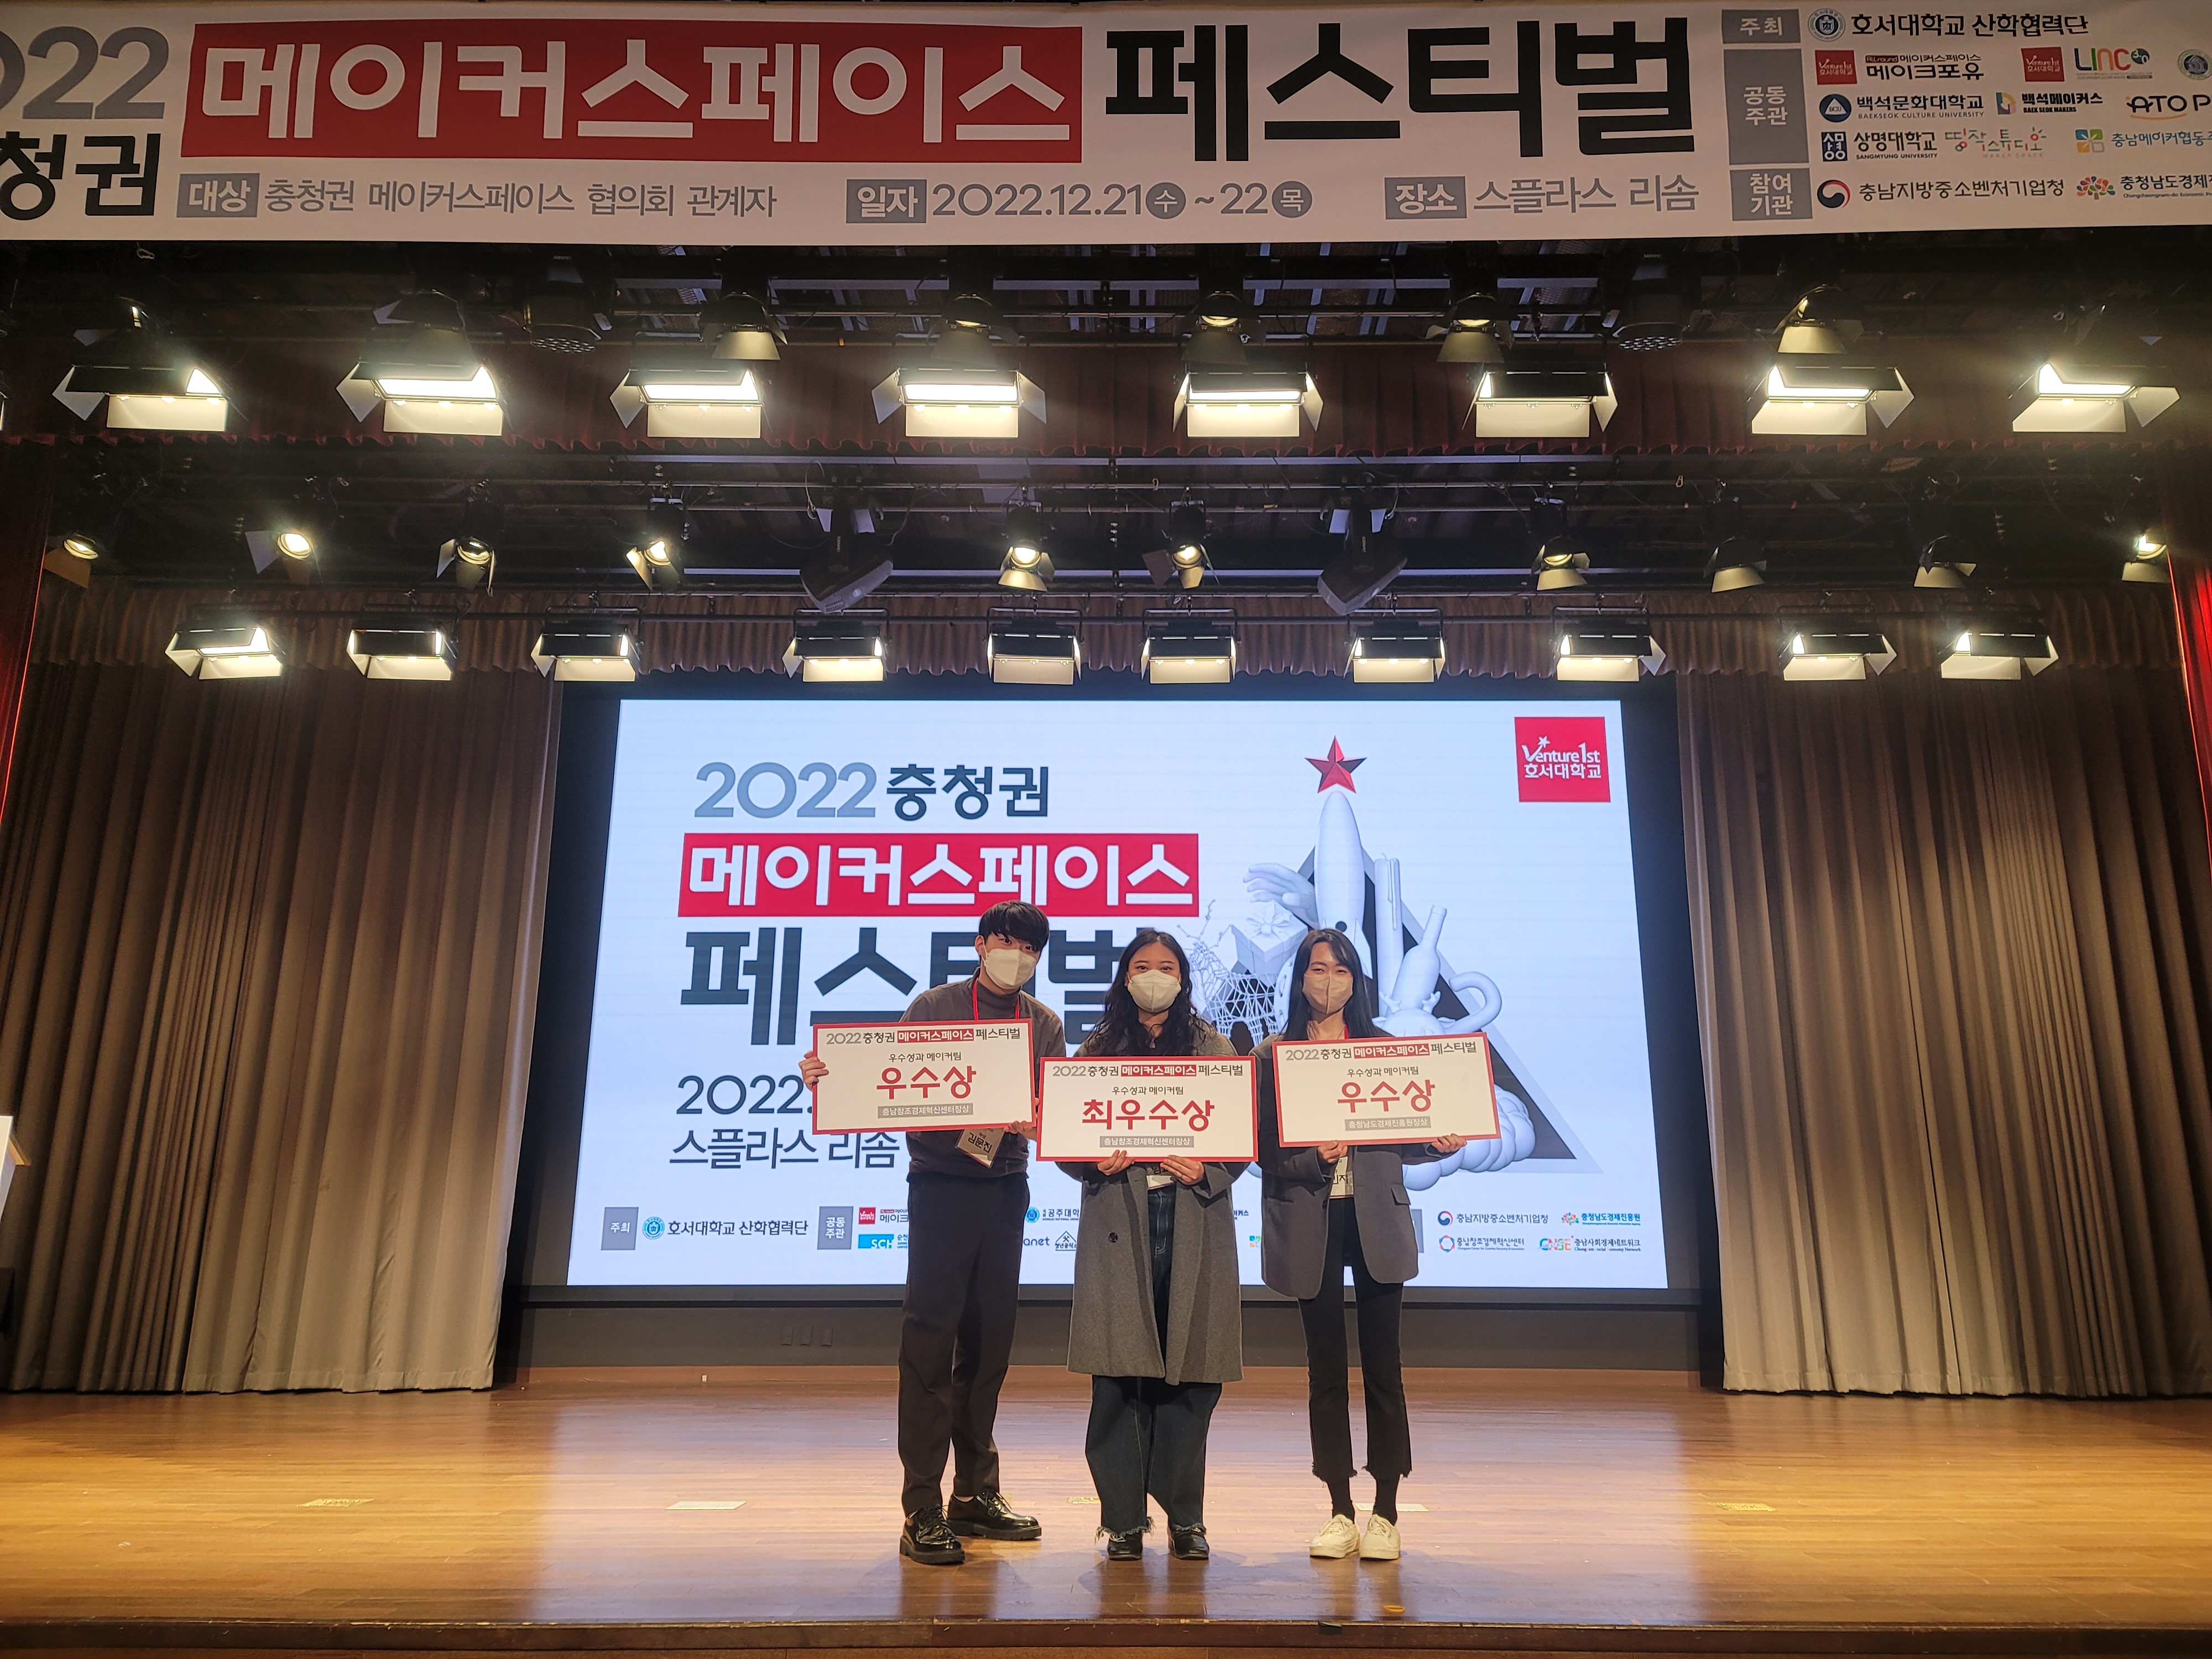 A Makerspace of Sangmyung University Swept 2022 Makerspace Festival